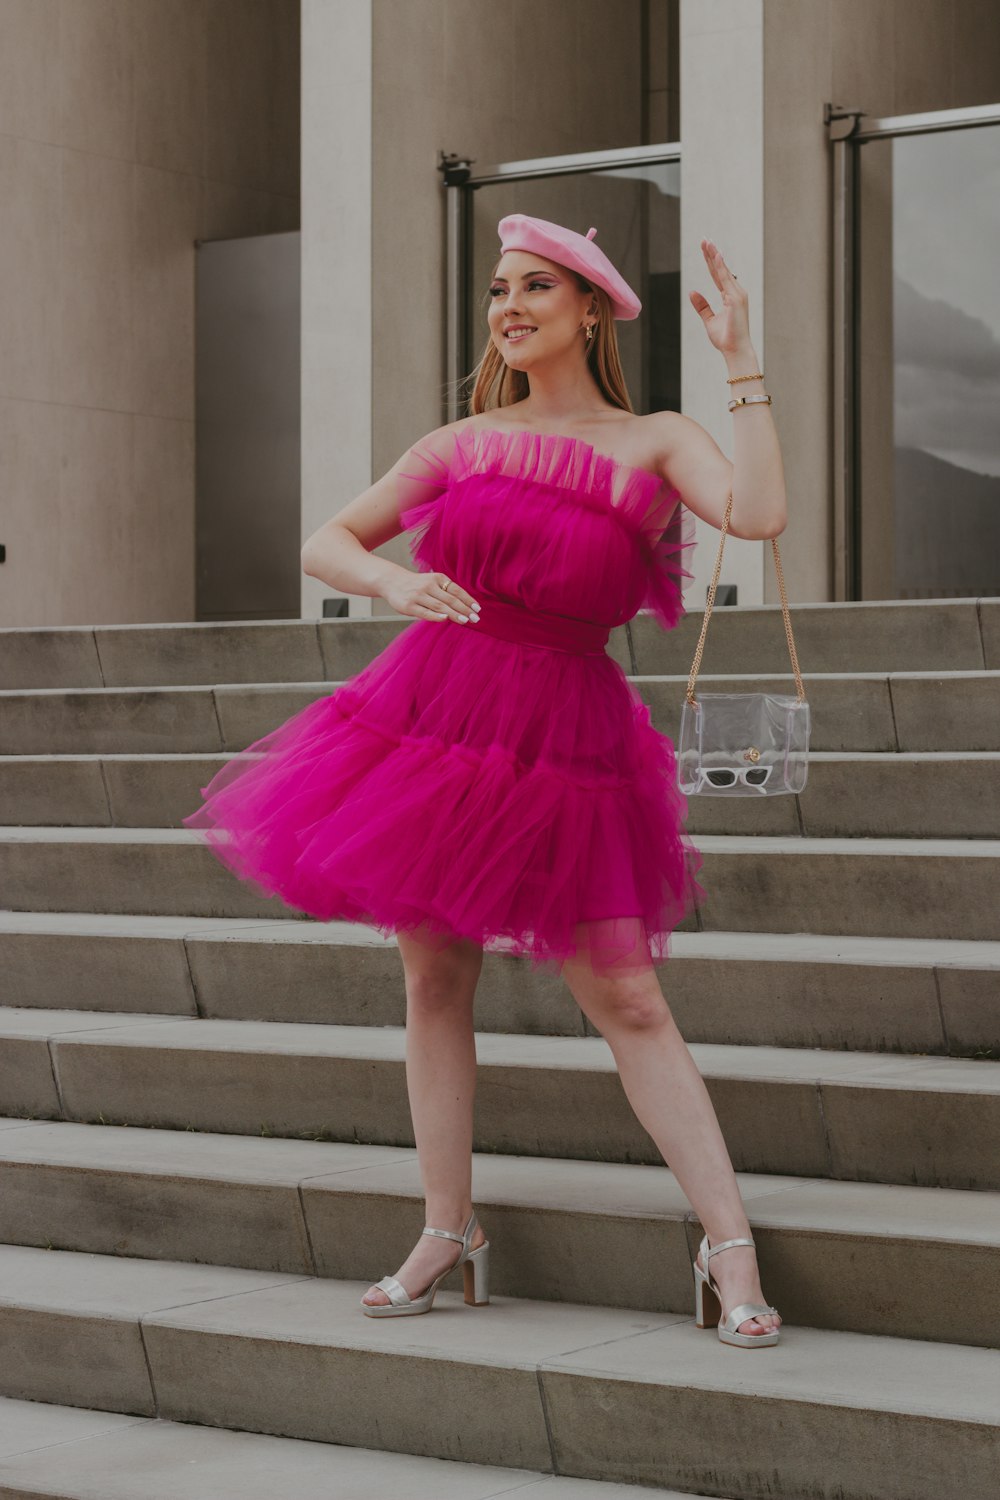 a woman in a pink dress and pink hat